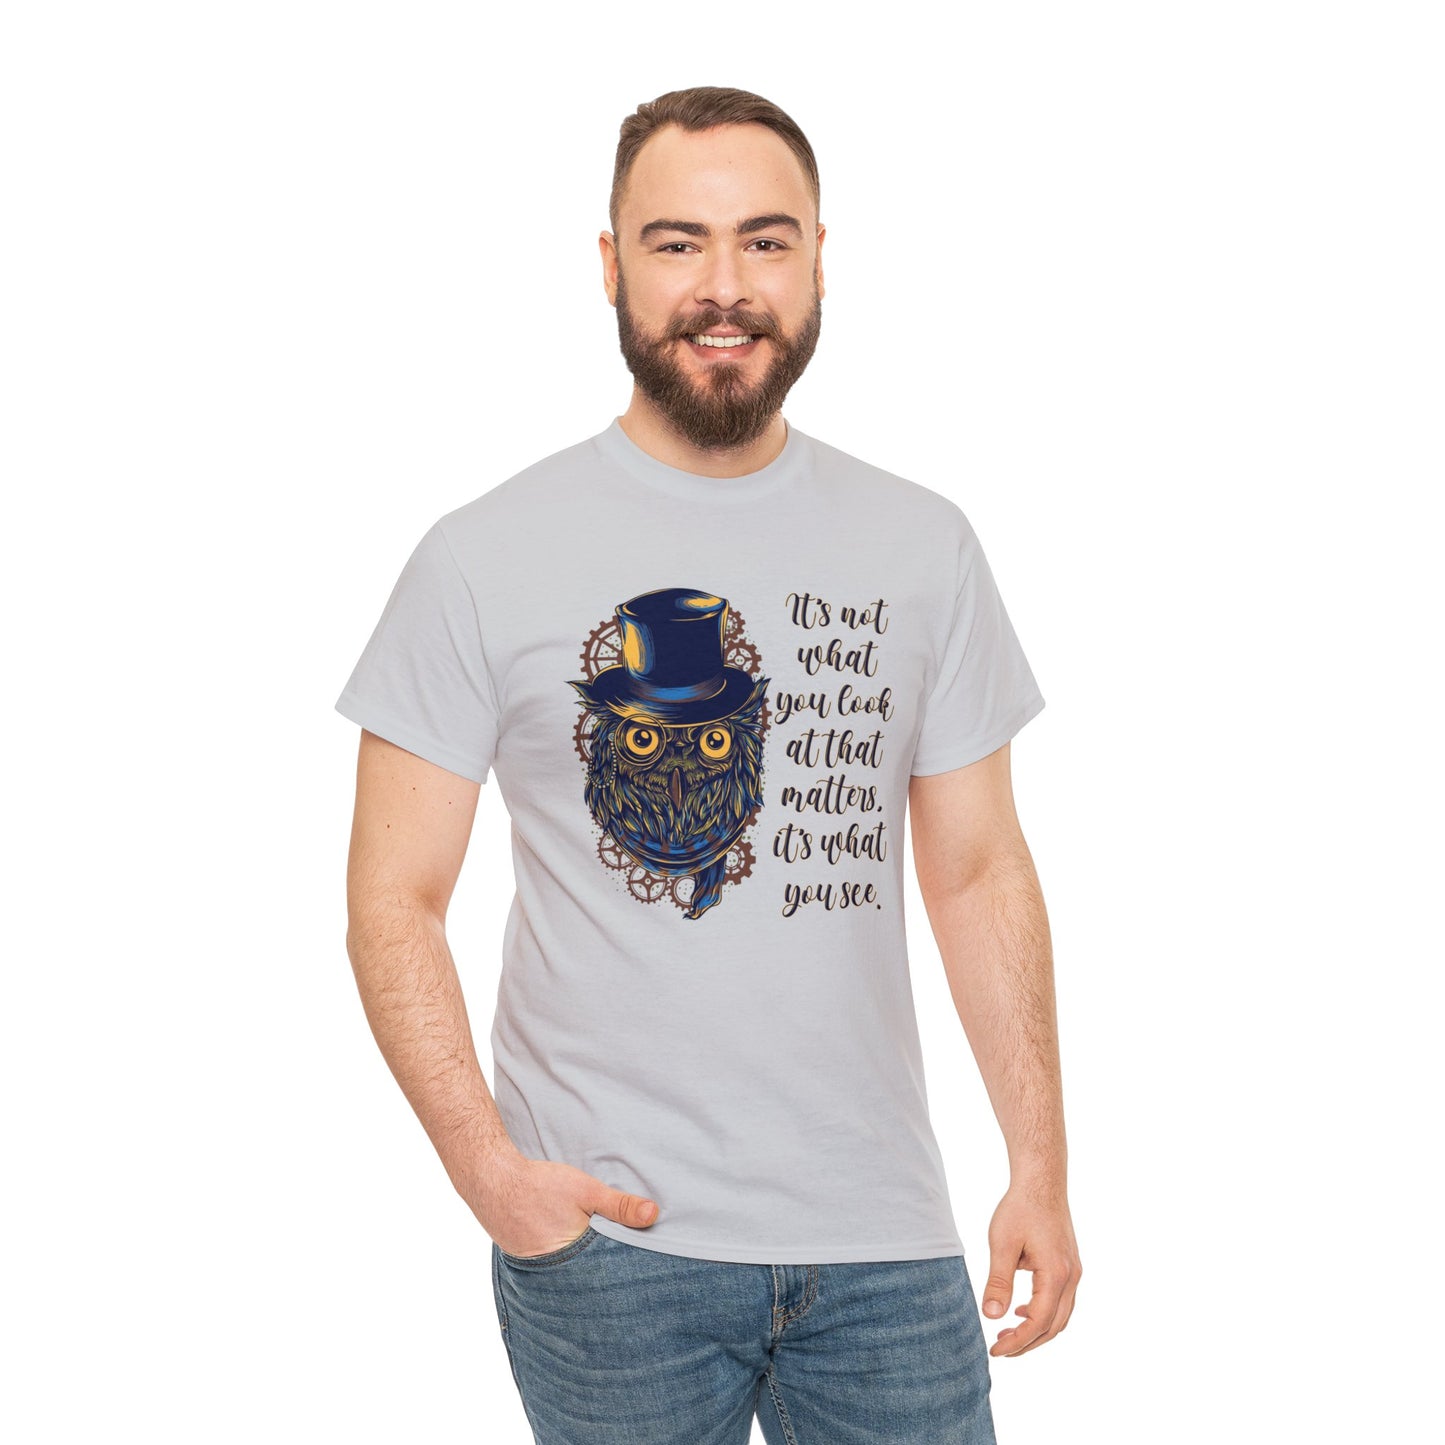 Steampunk Owl T-Shirt For Wise Owl Quote T Shirt For Teacher TShirt For Inspirational Quote Shirt